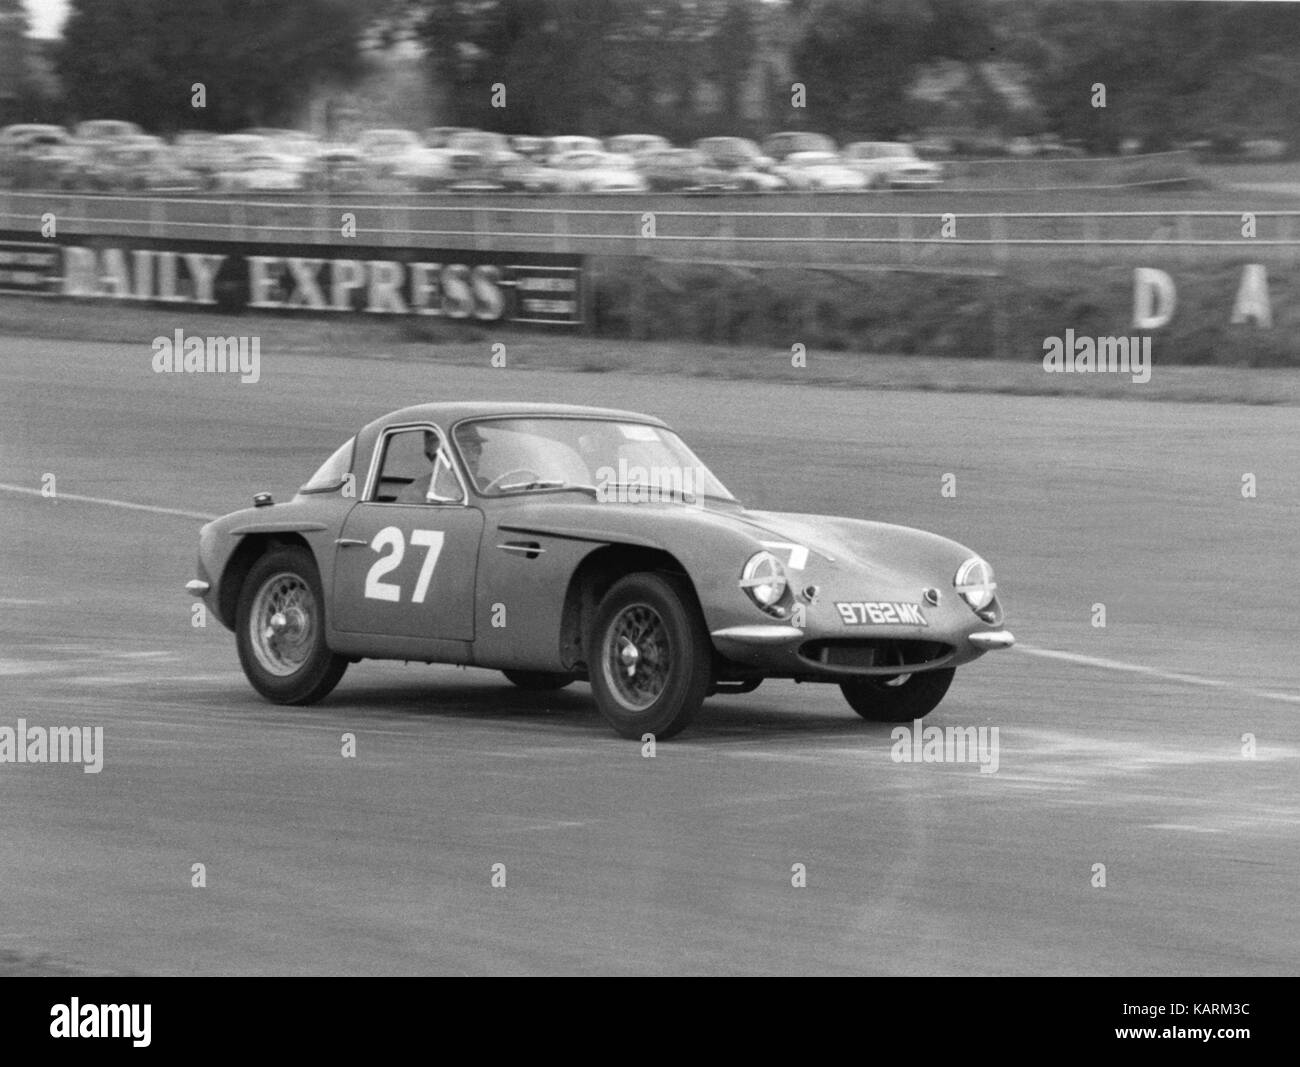 Tvr Black and White Stock Photos & Images - Alamy